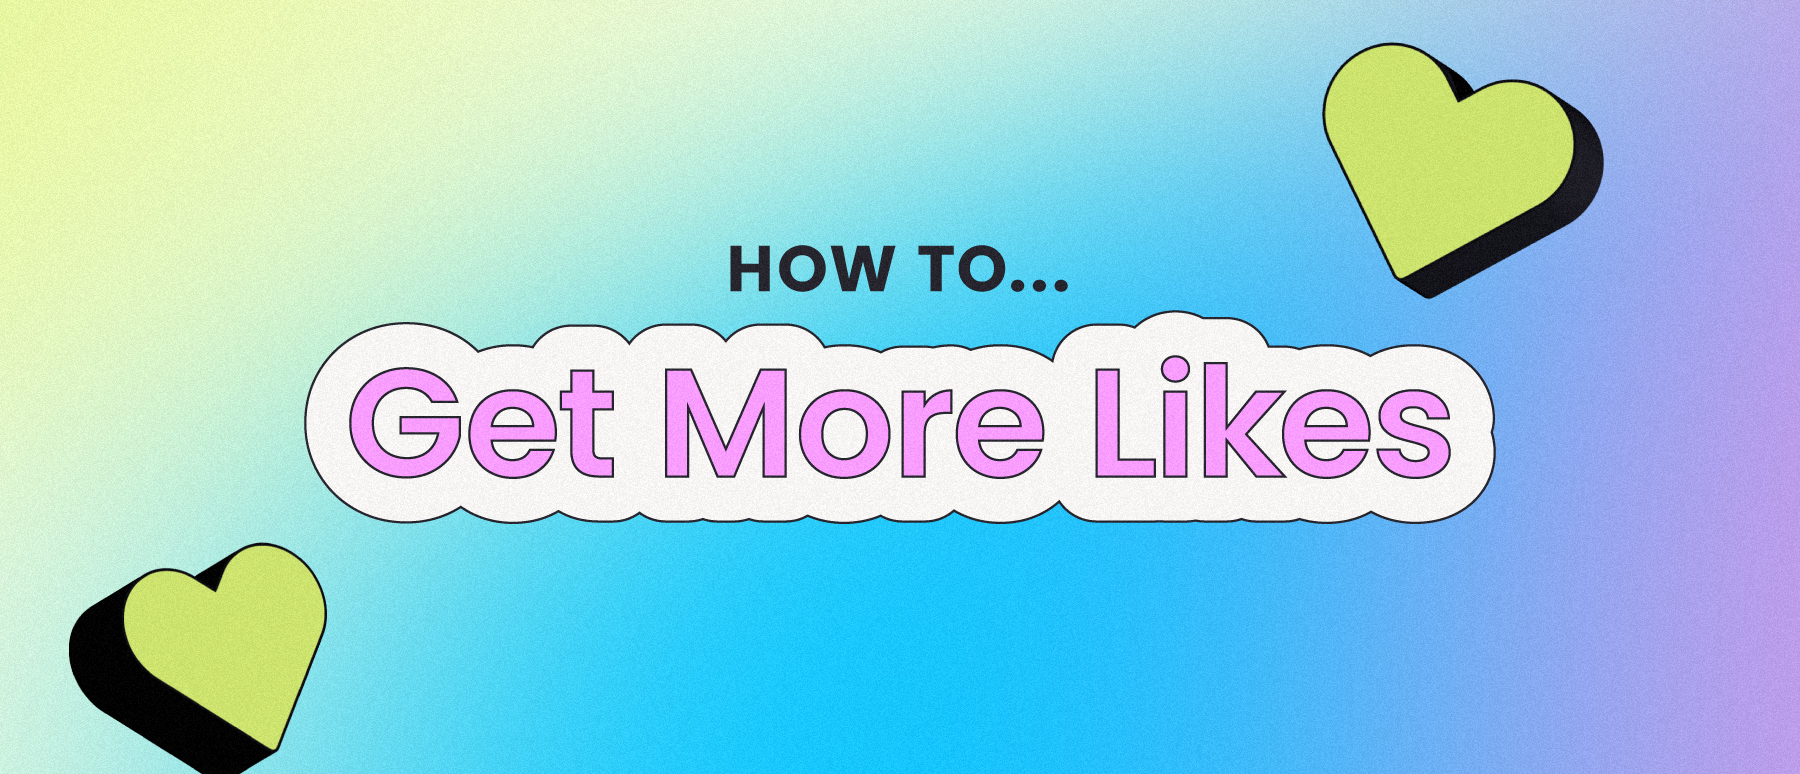 Colorful image that says get more likes